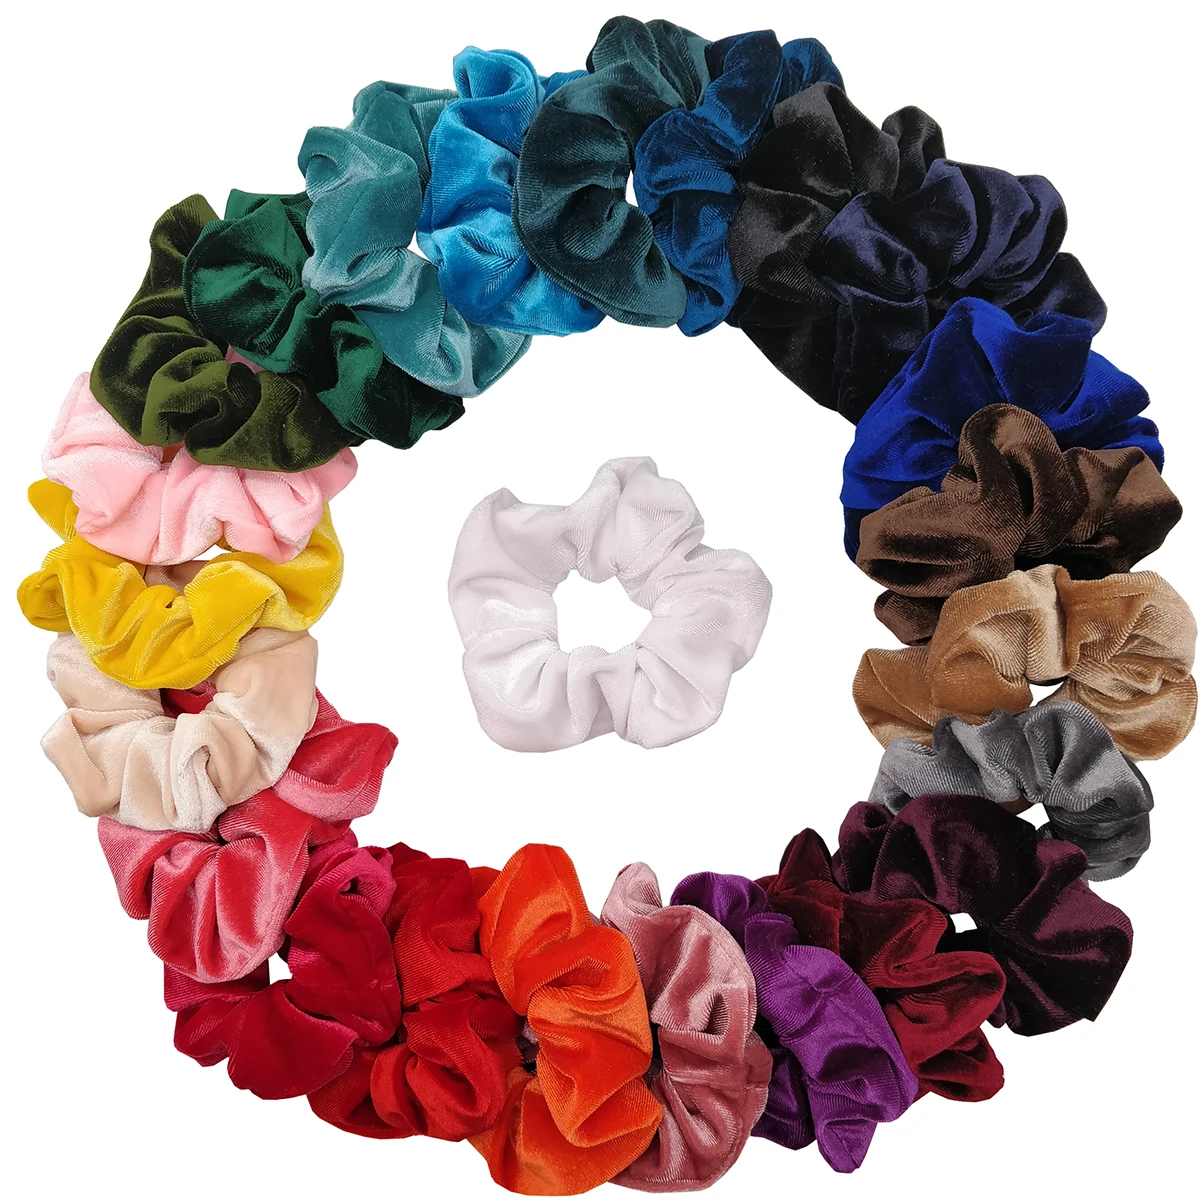 50/40/30pc Winter Soft Hair Scrunchies for Women Girl Plush Elastic Tie Rubber Band Christmas Santa Accessories Fluffy Fake Fur colin james little big band christmas 1 cd